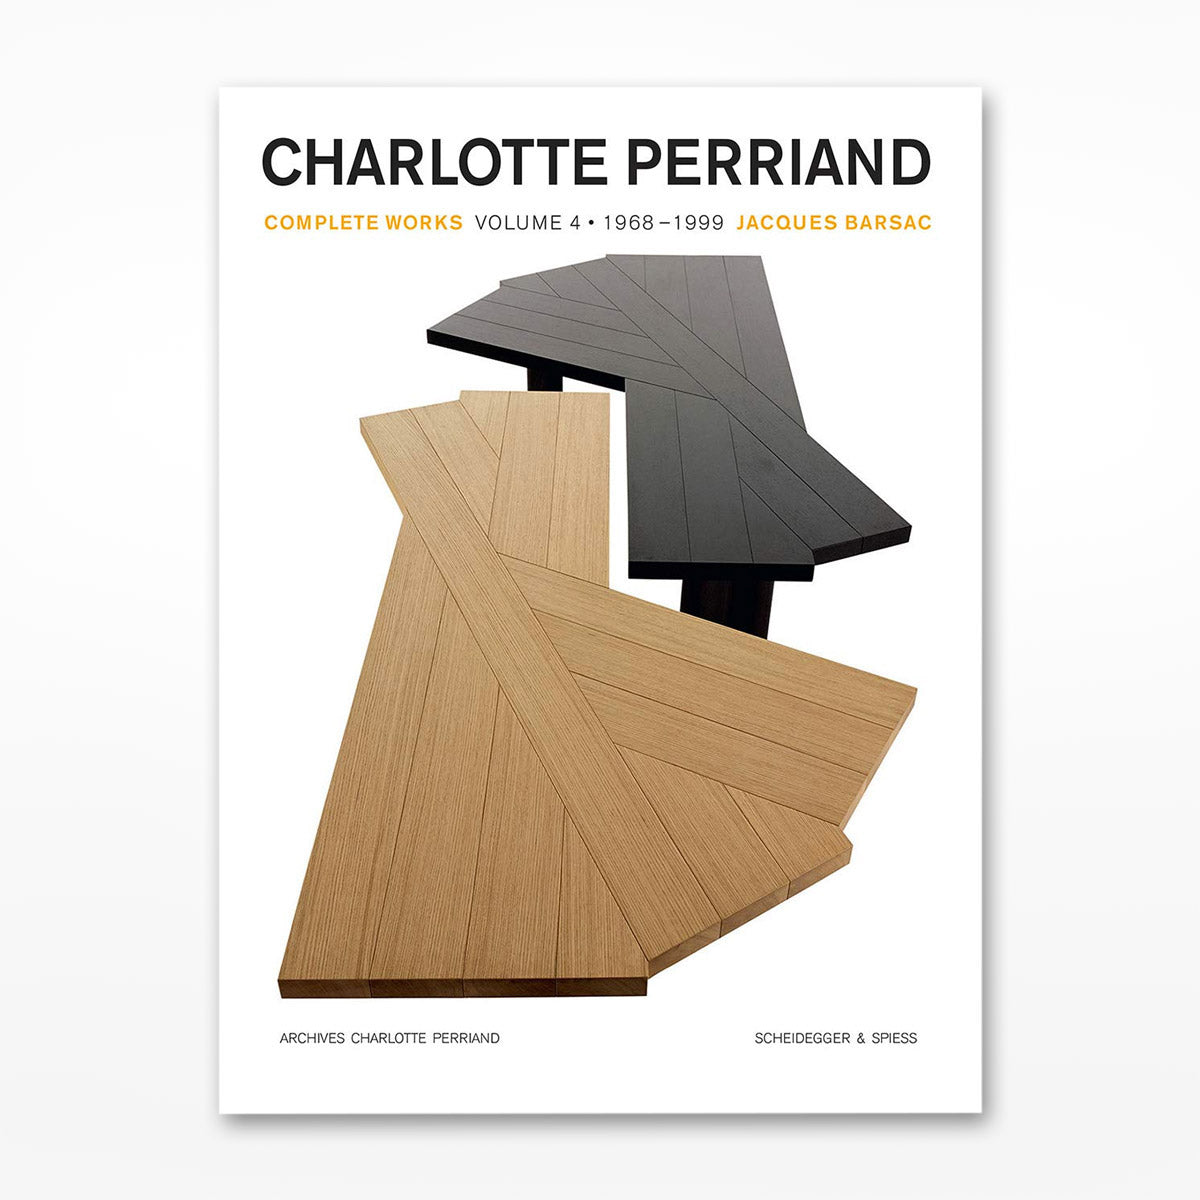 Charlotte Perriand: The Modern Life exhibition at The Design Museum in  London